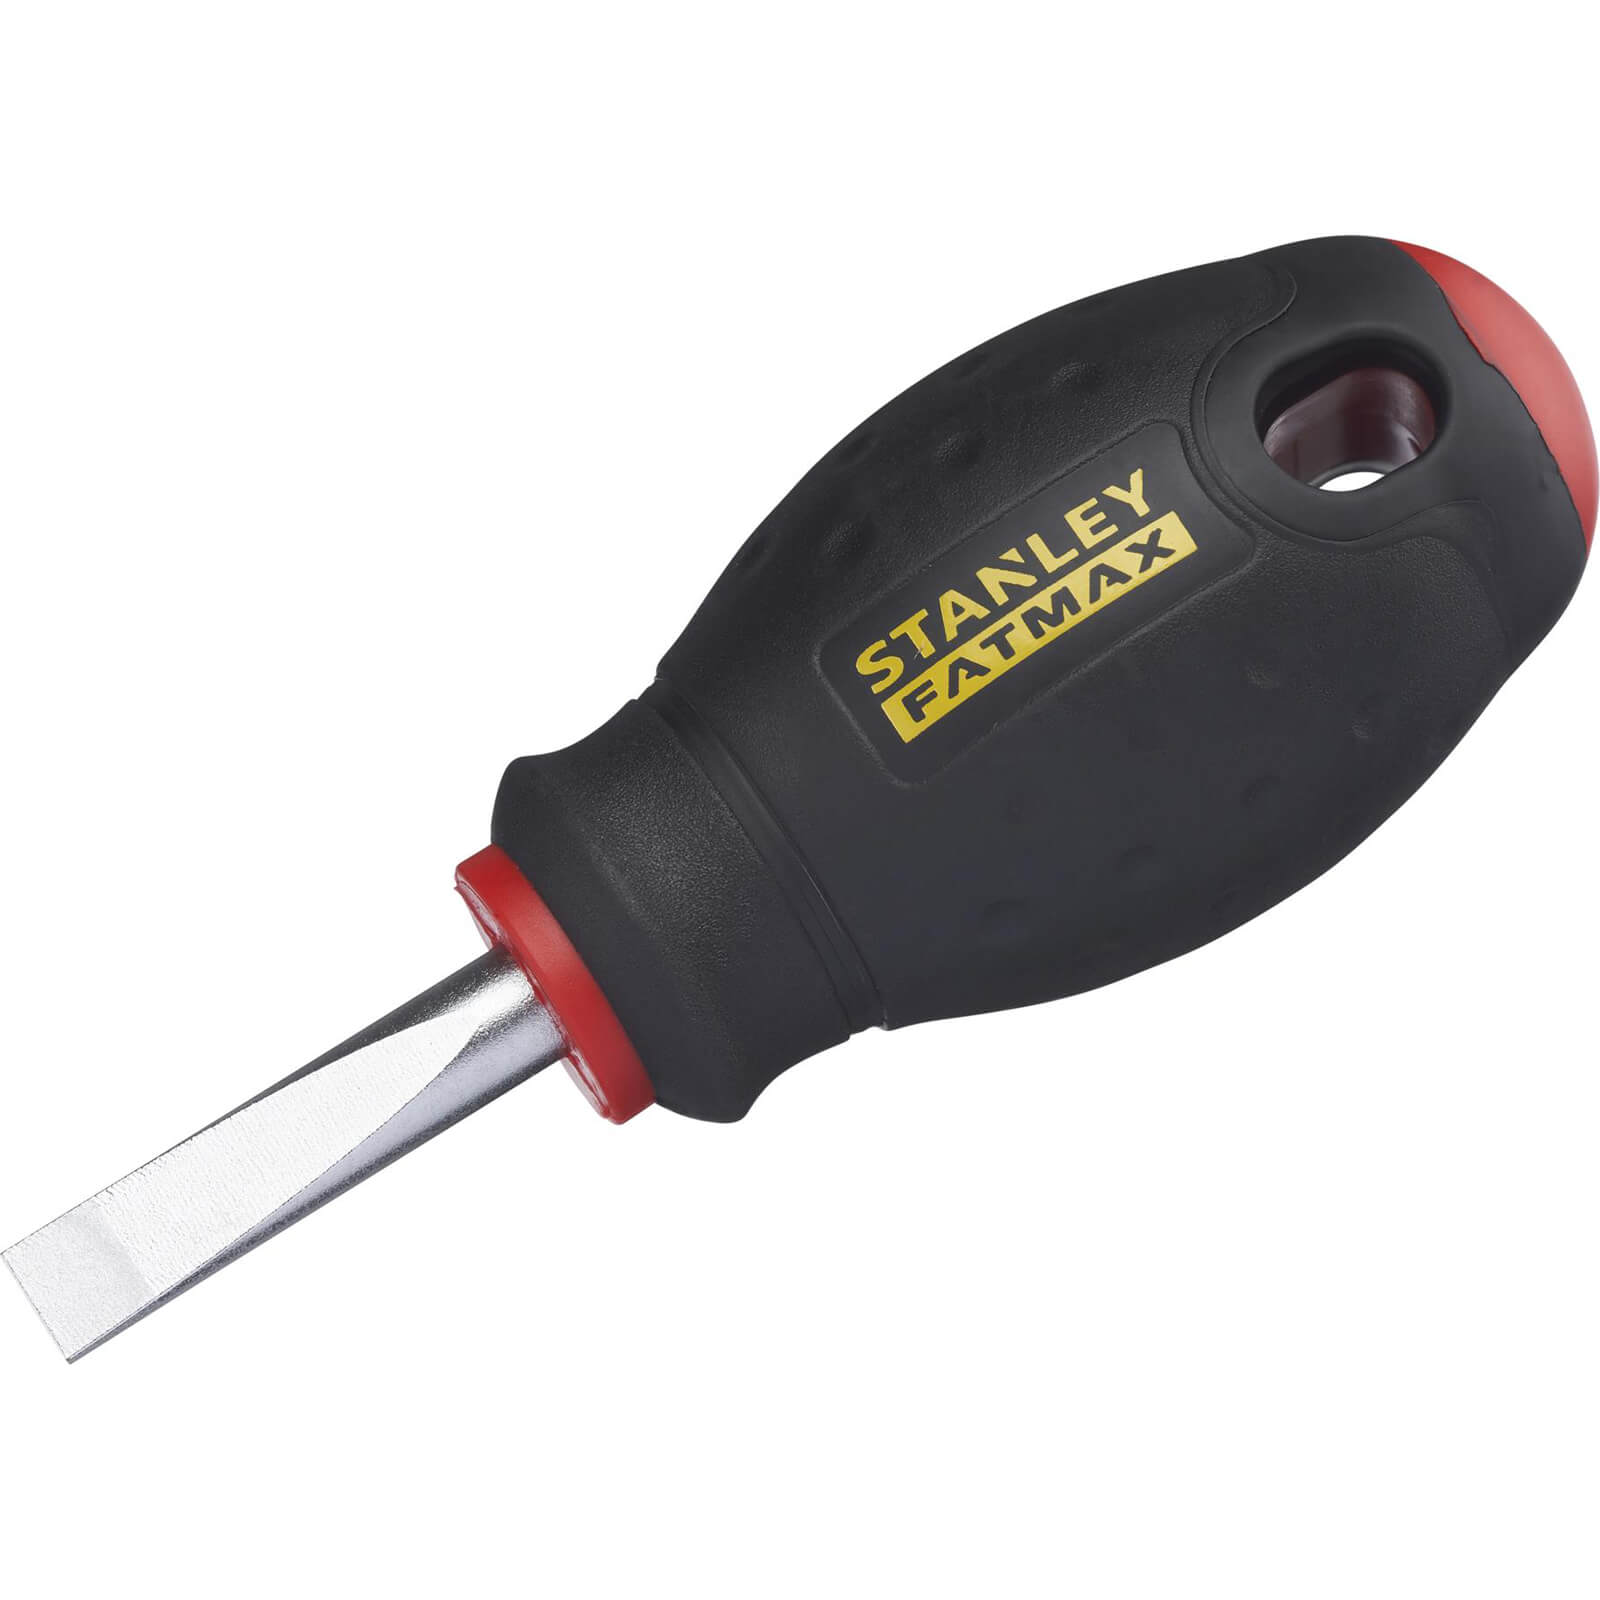 Photo of Stanley Fatmax Parallel Slotted Screwdriver 6.5mm 30mm